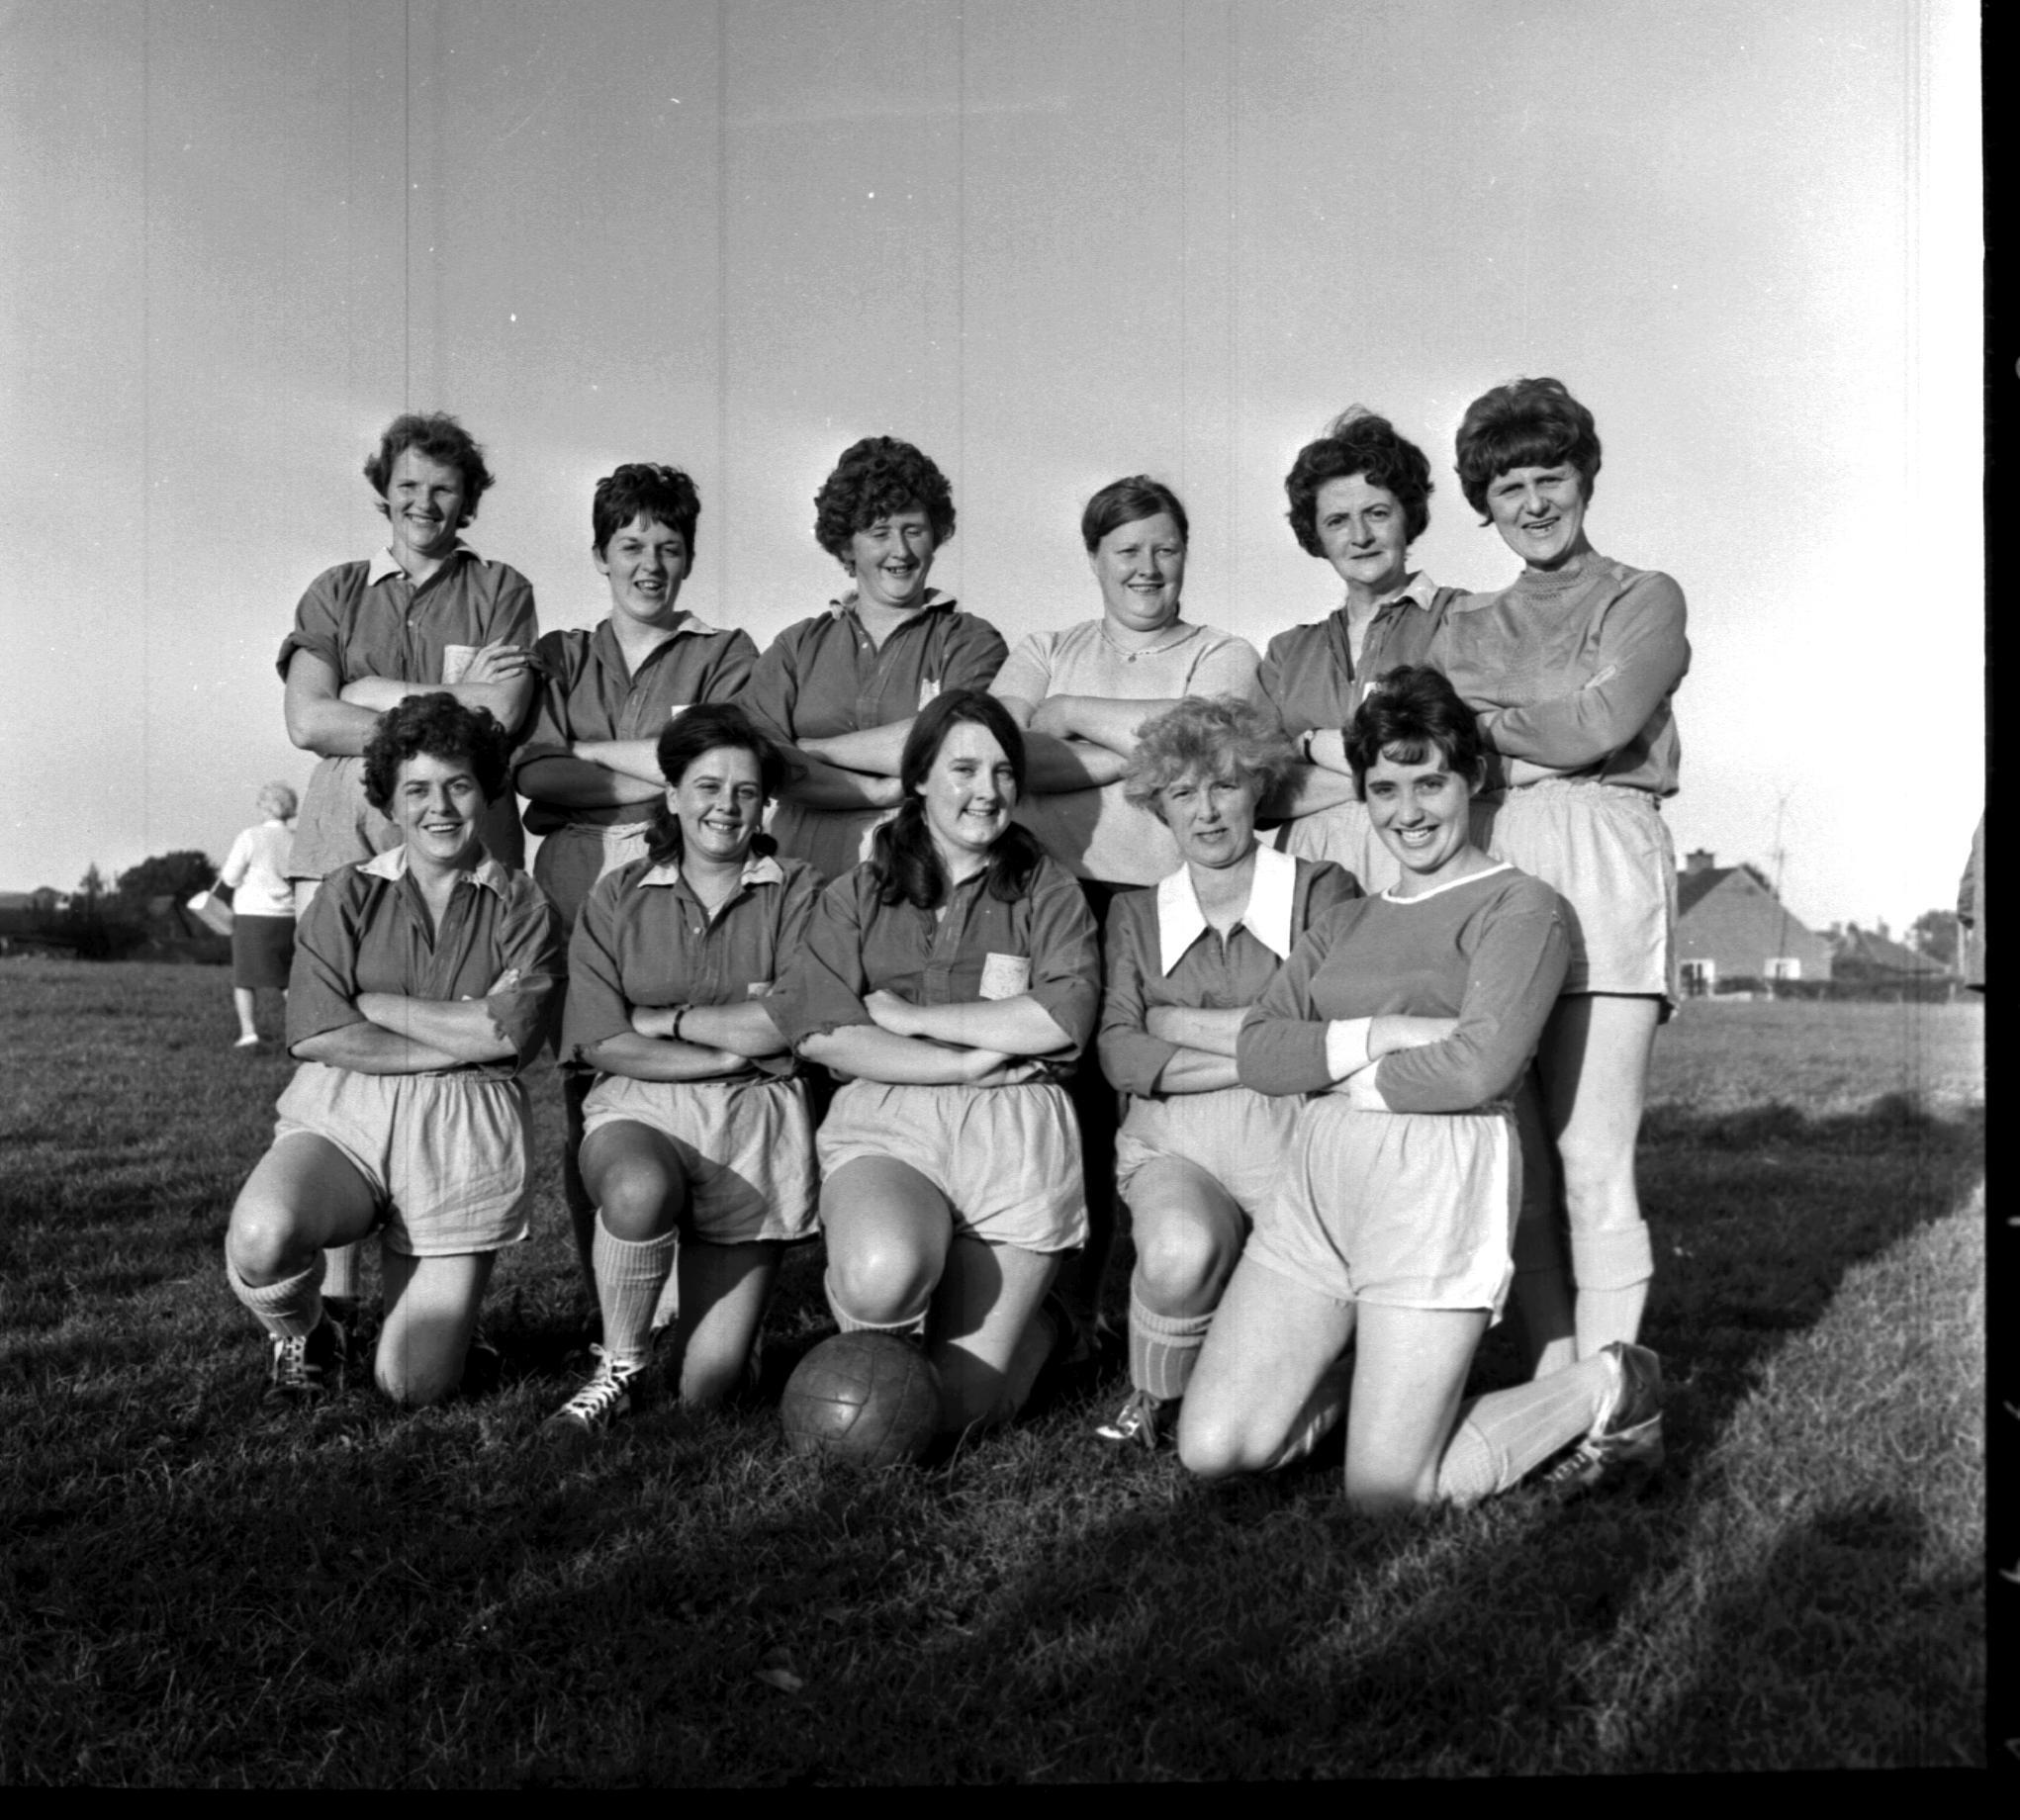 A womens football team in St Martins in 1969.